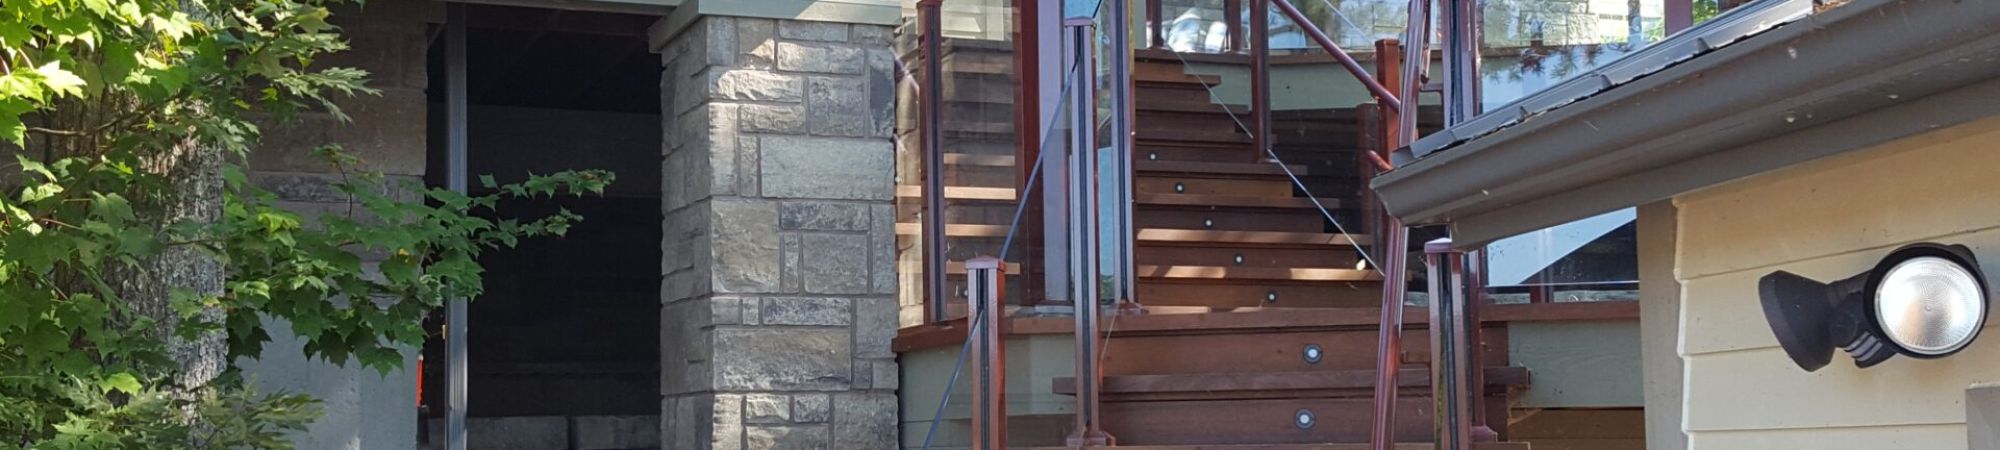 Staircase with pipe handrails